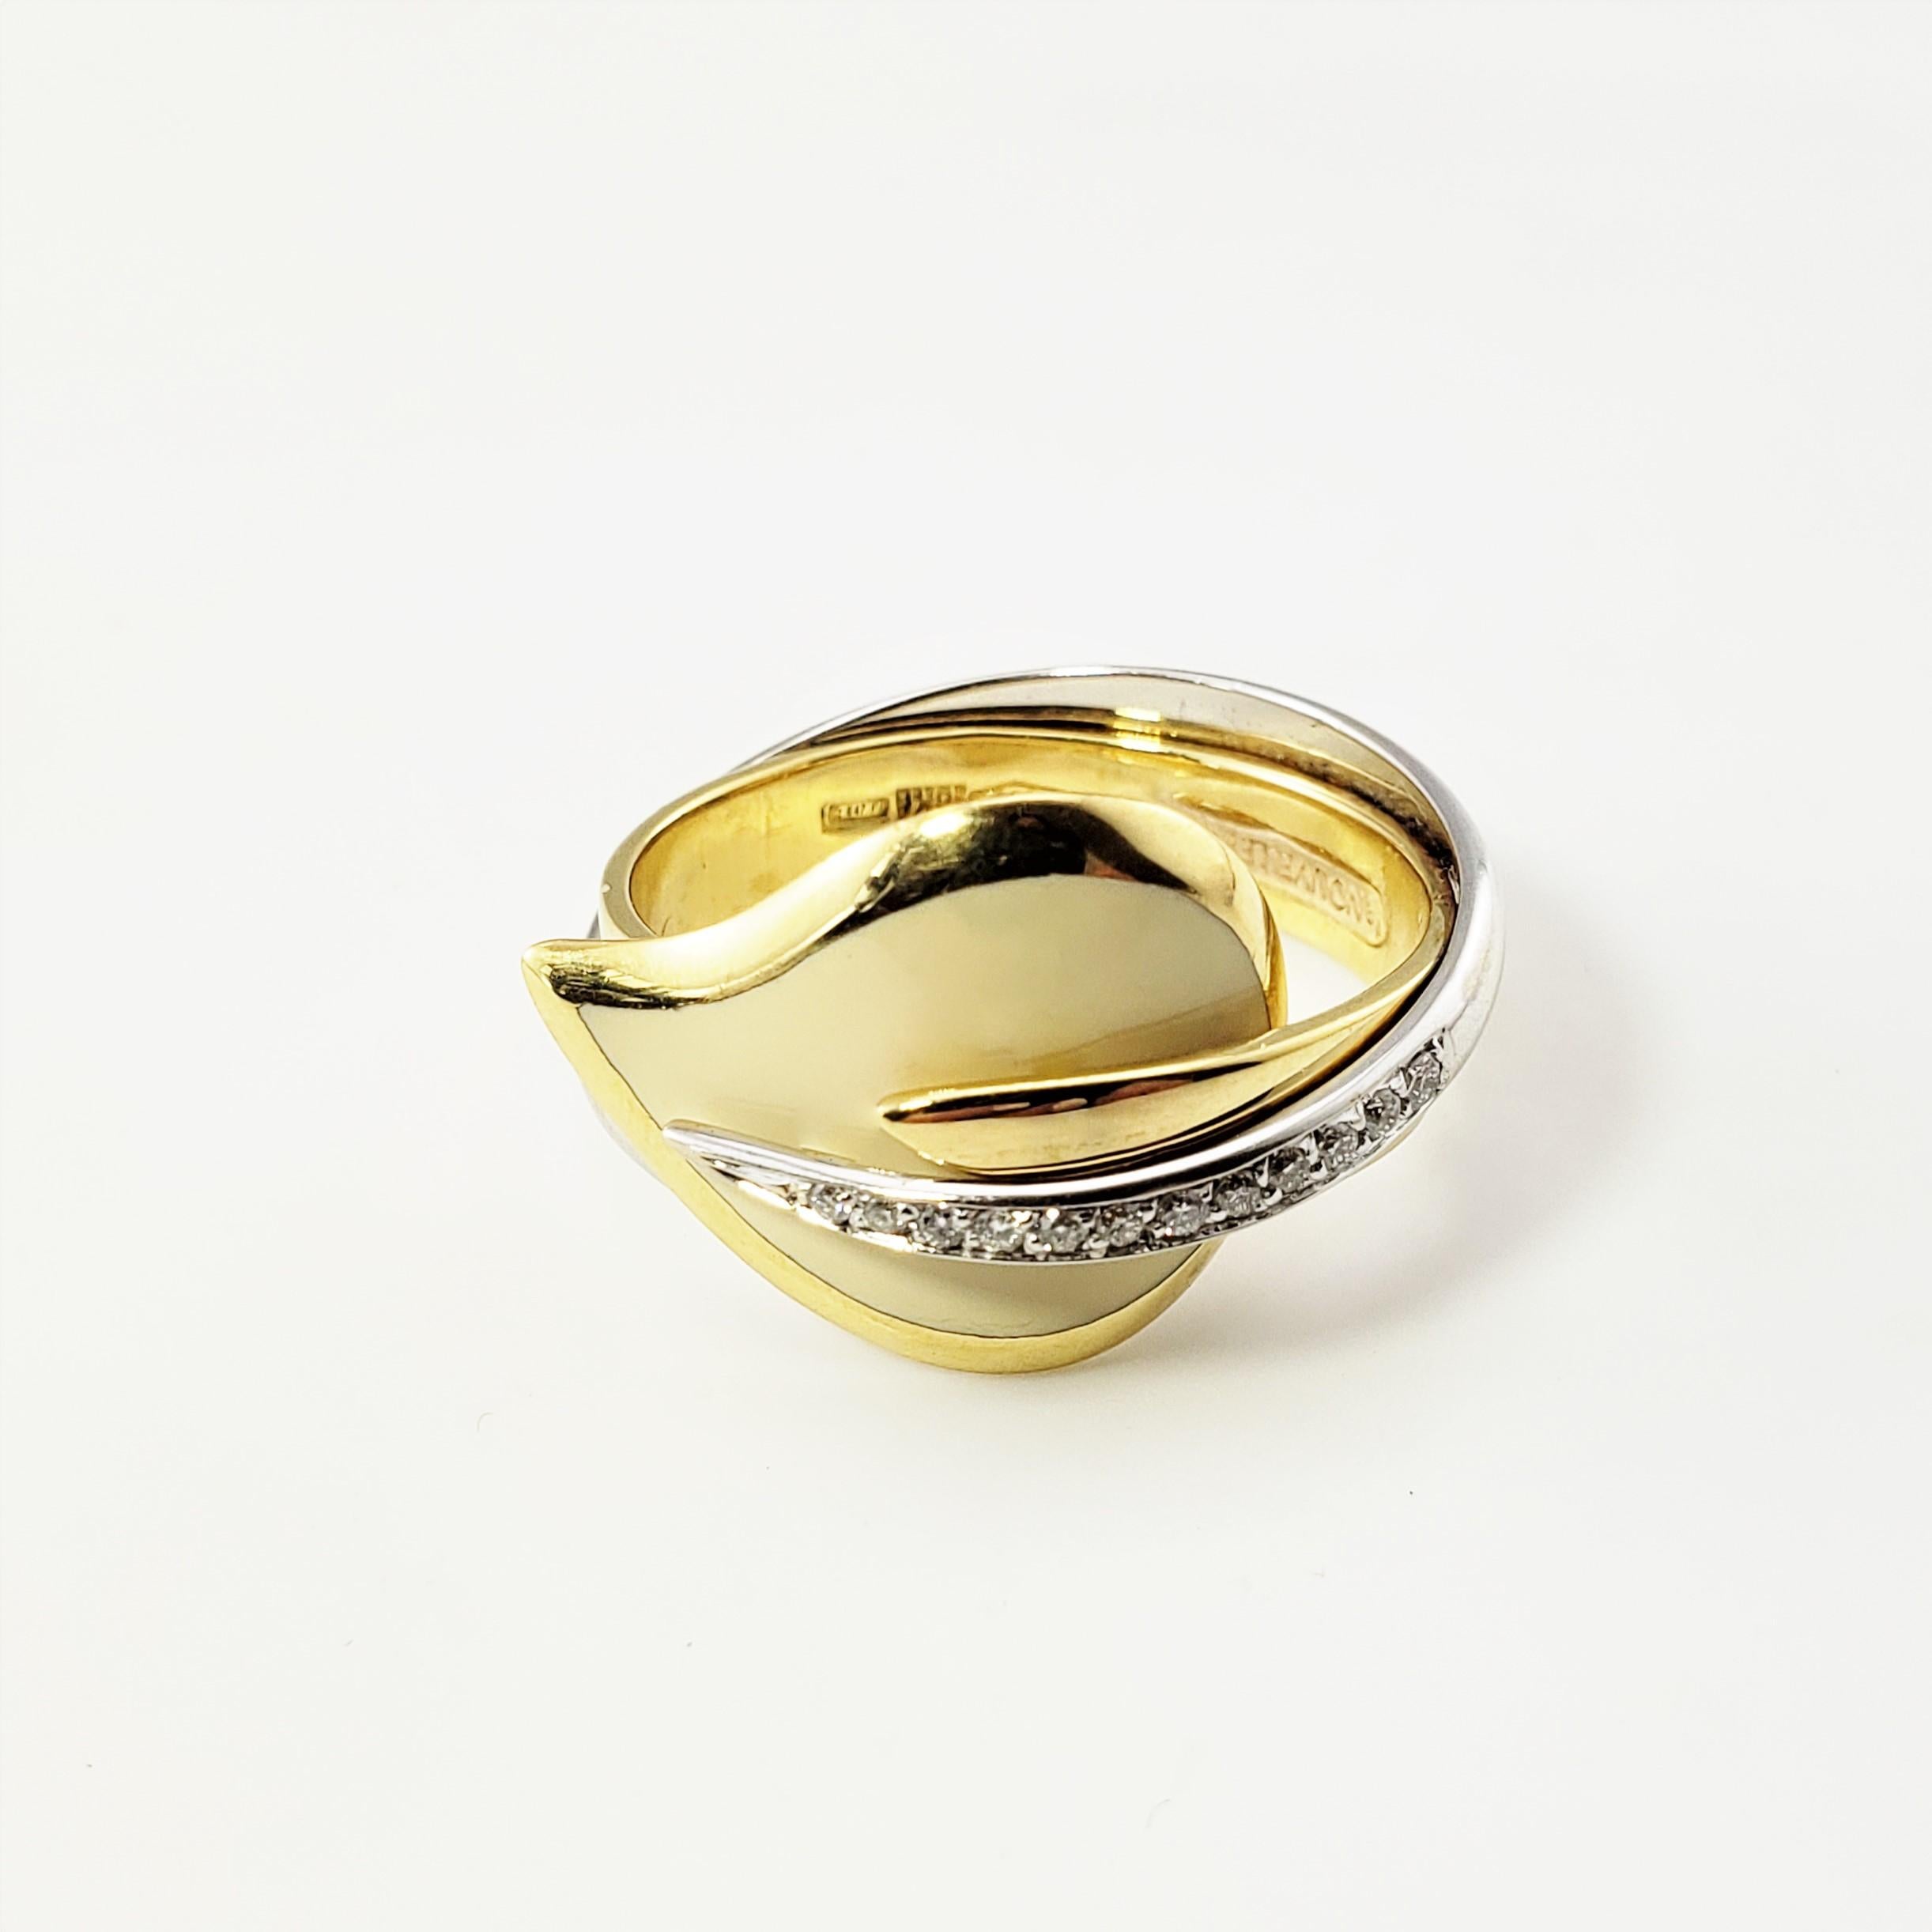 18 Karat Yellow/White Gold Nouvell Bacue Enamel and Diamond Calla Lily Ring Size 8-

This elegant calla lily ring is accented with cream enamel and 12 round brilliant cut diamonds set in beautifully detailed 18K yellow and white gold.  Width: 14 mm.